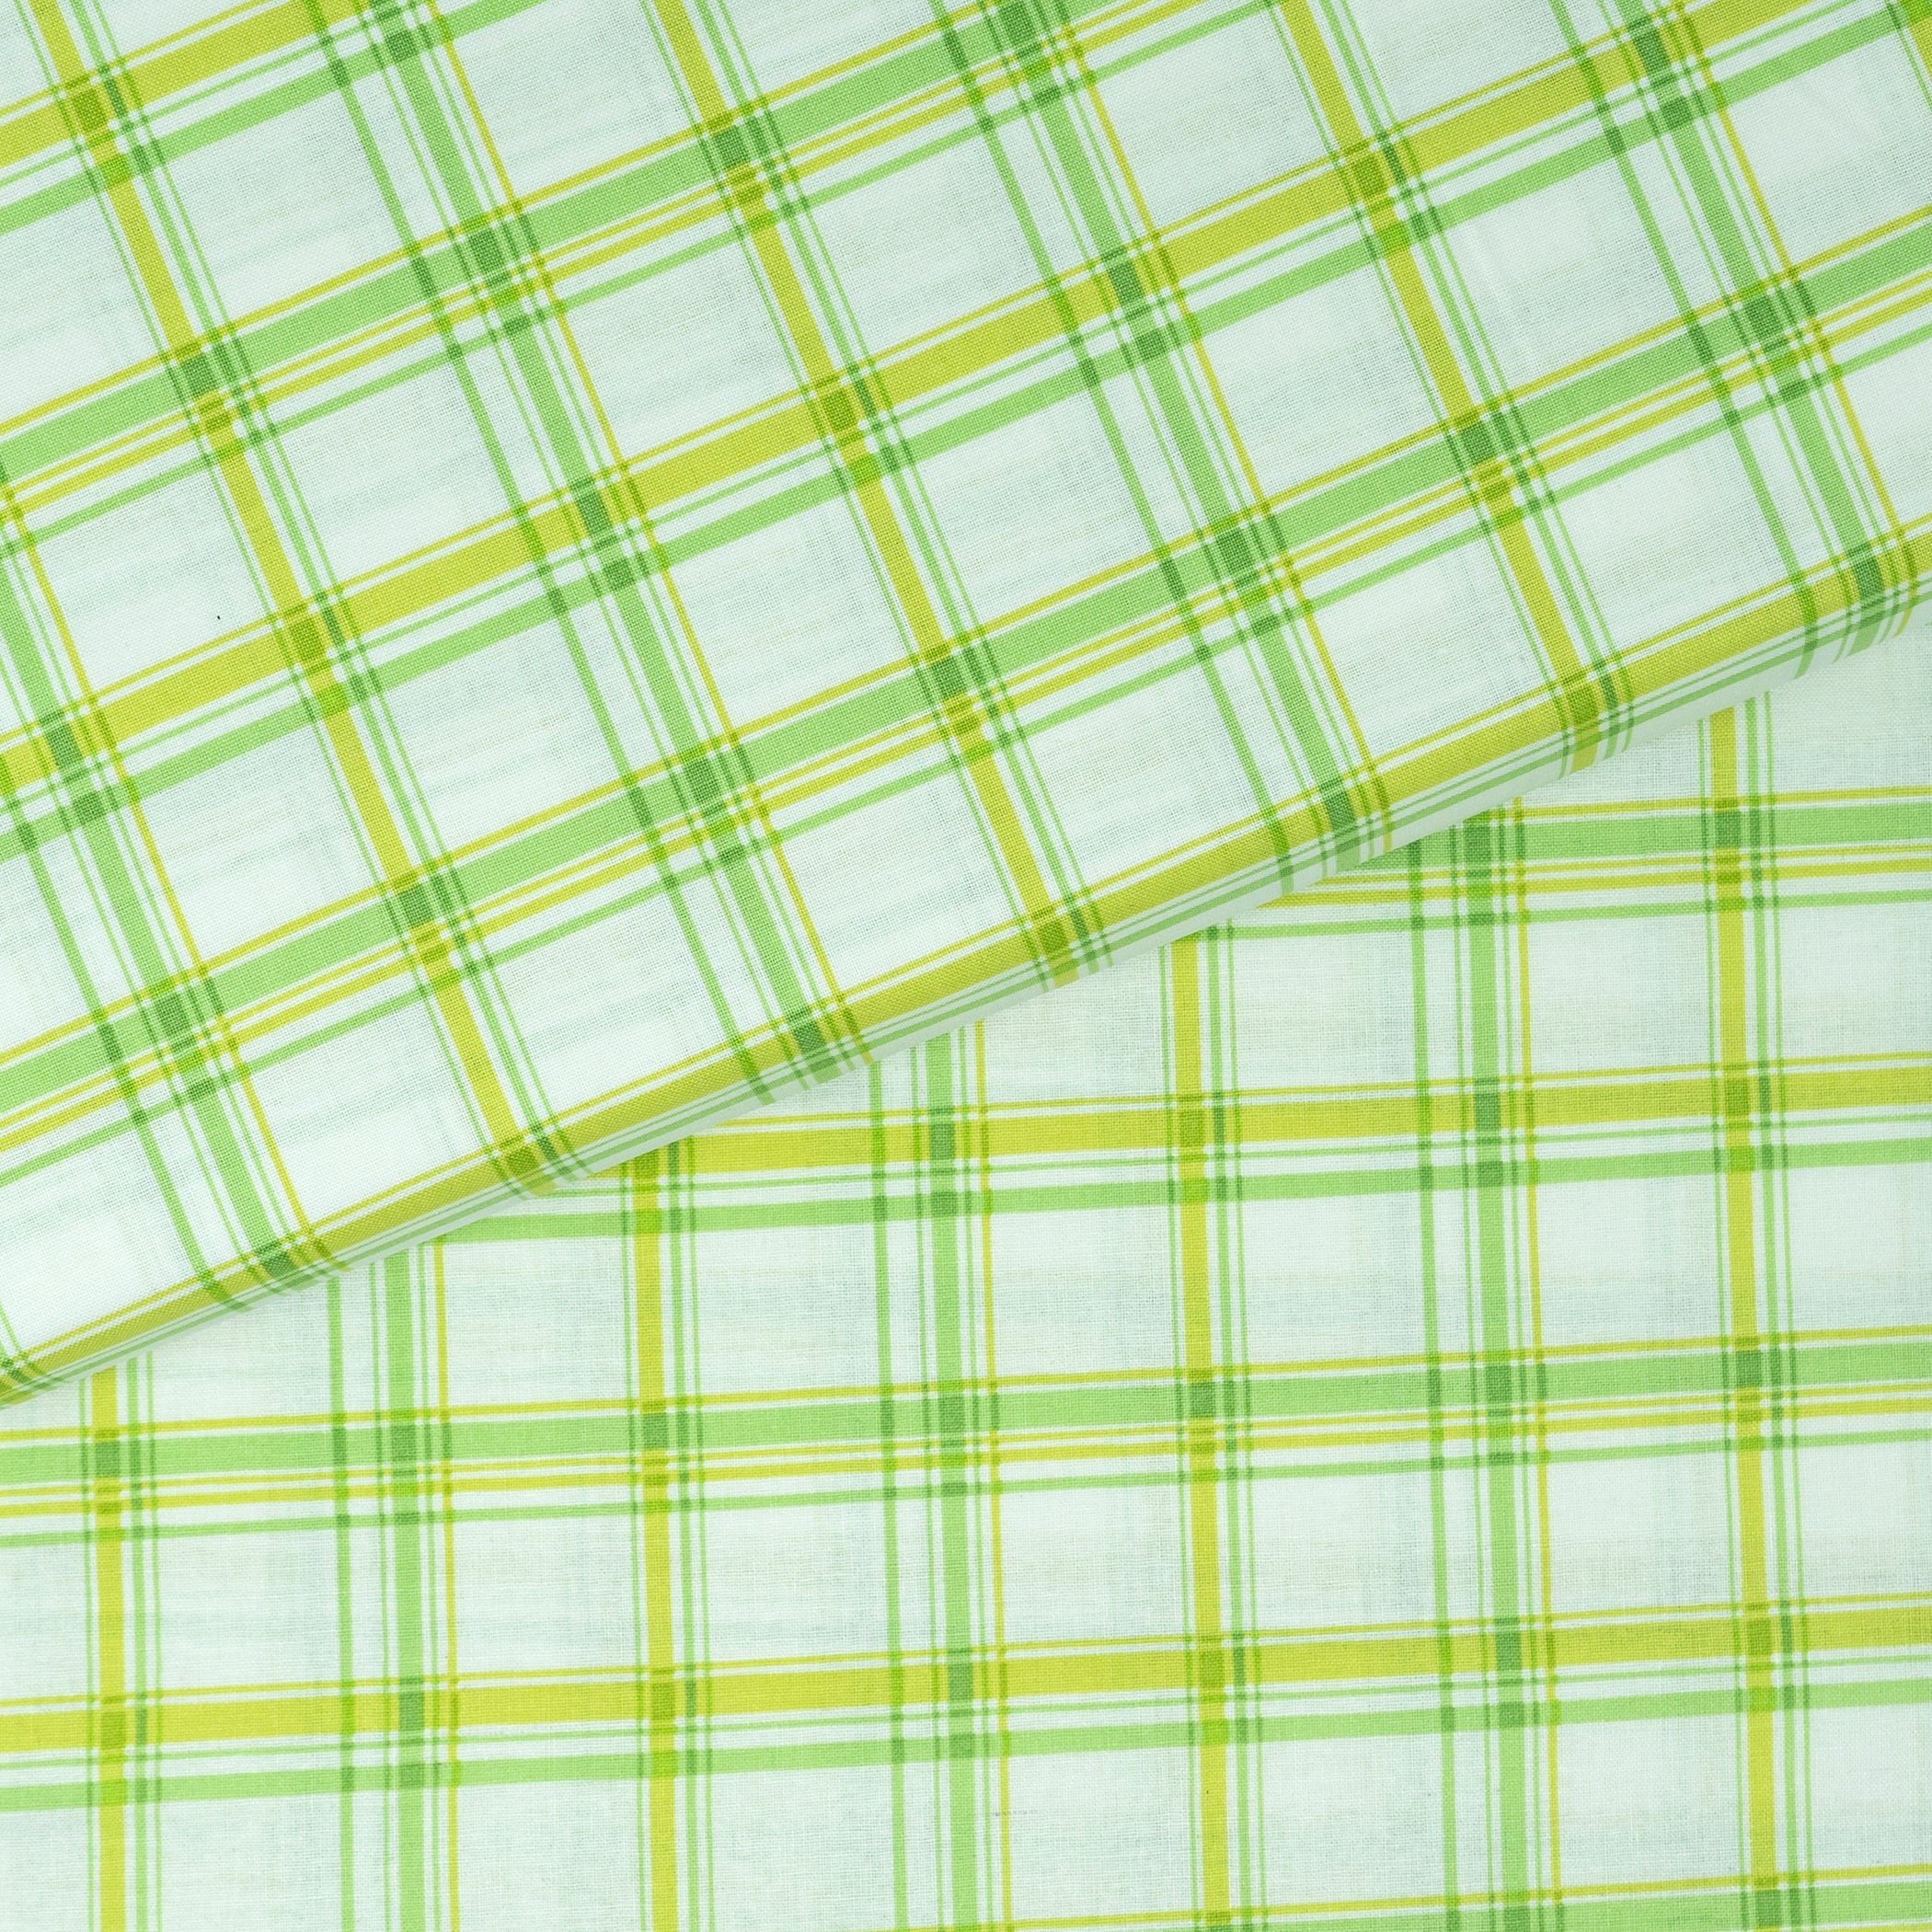 Waverly Inspirations Cotton 44" Plaid Grass Color Sewing Fabric by the Yard